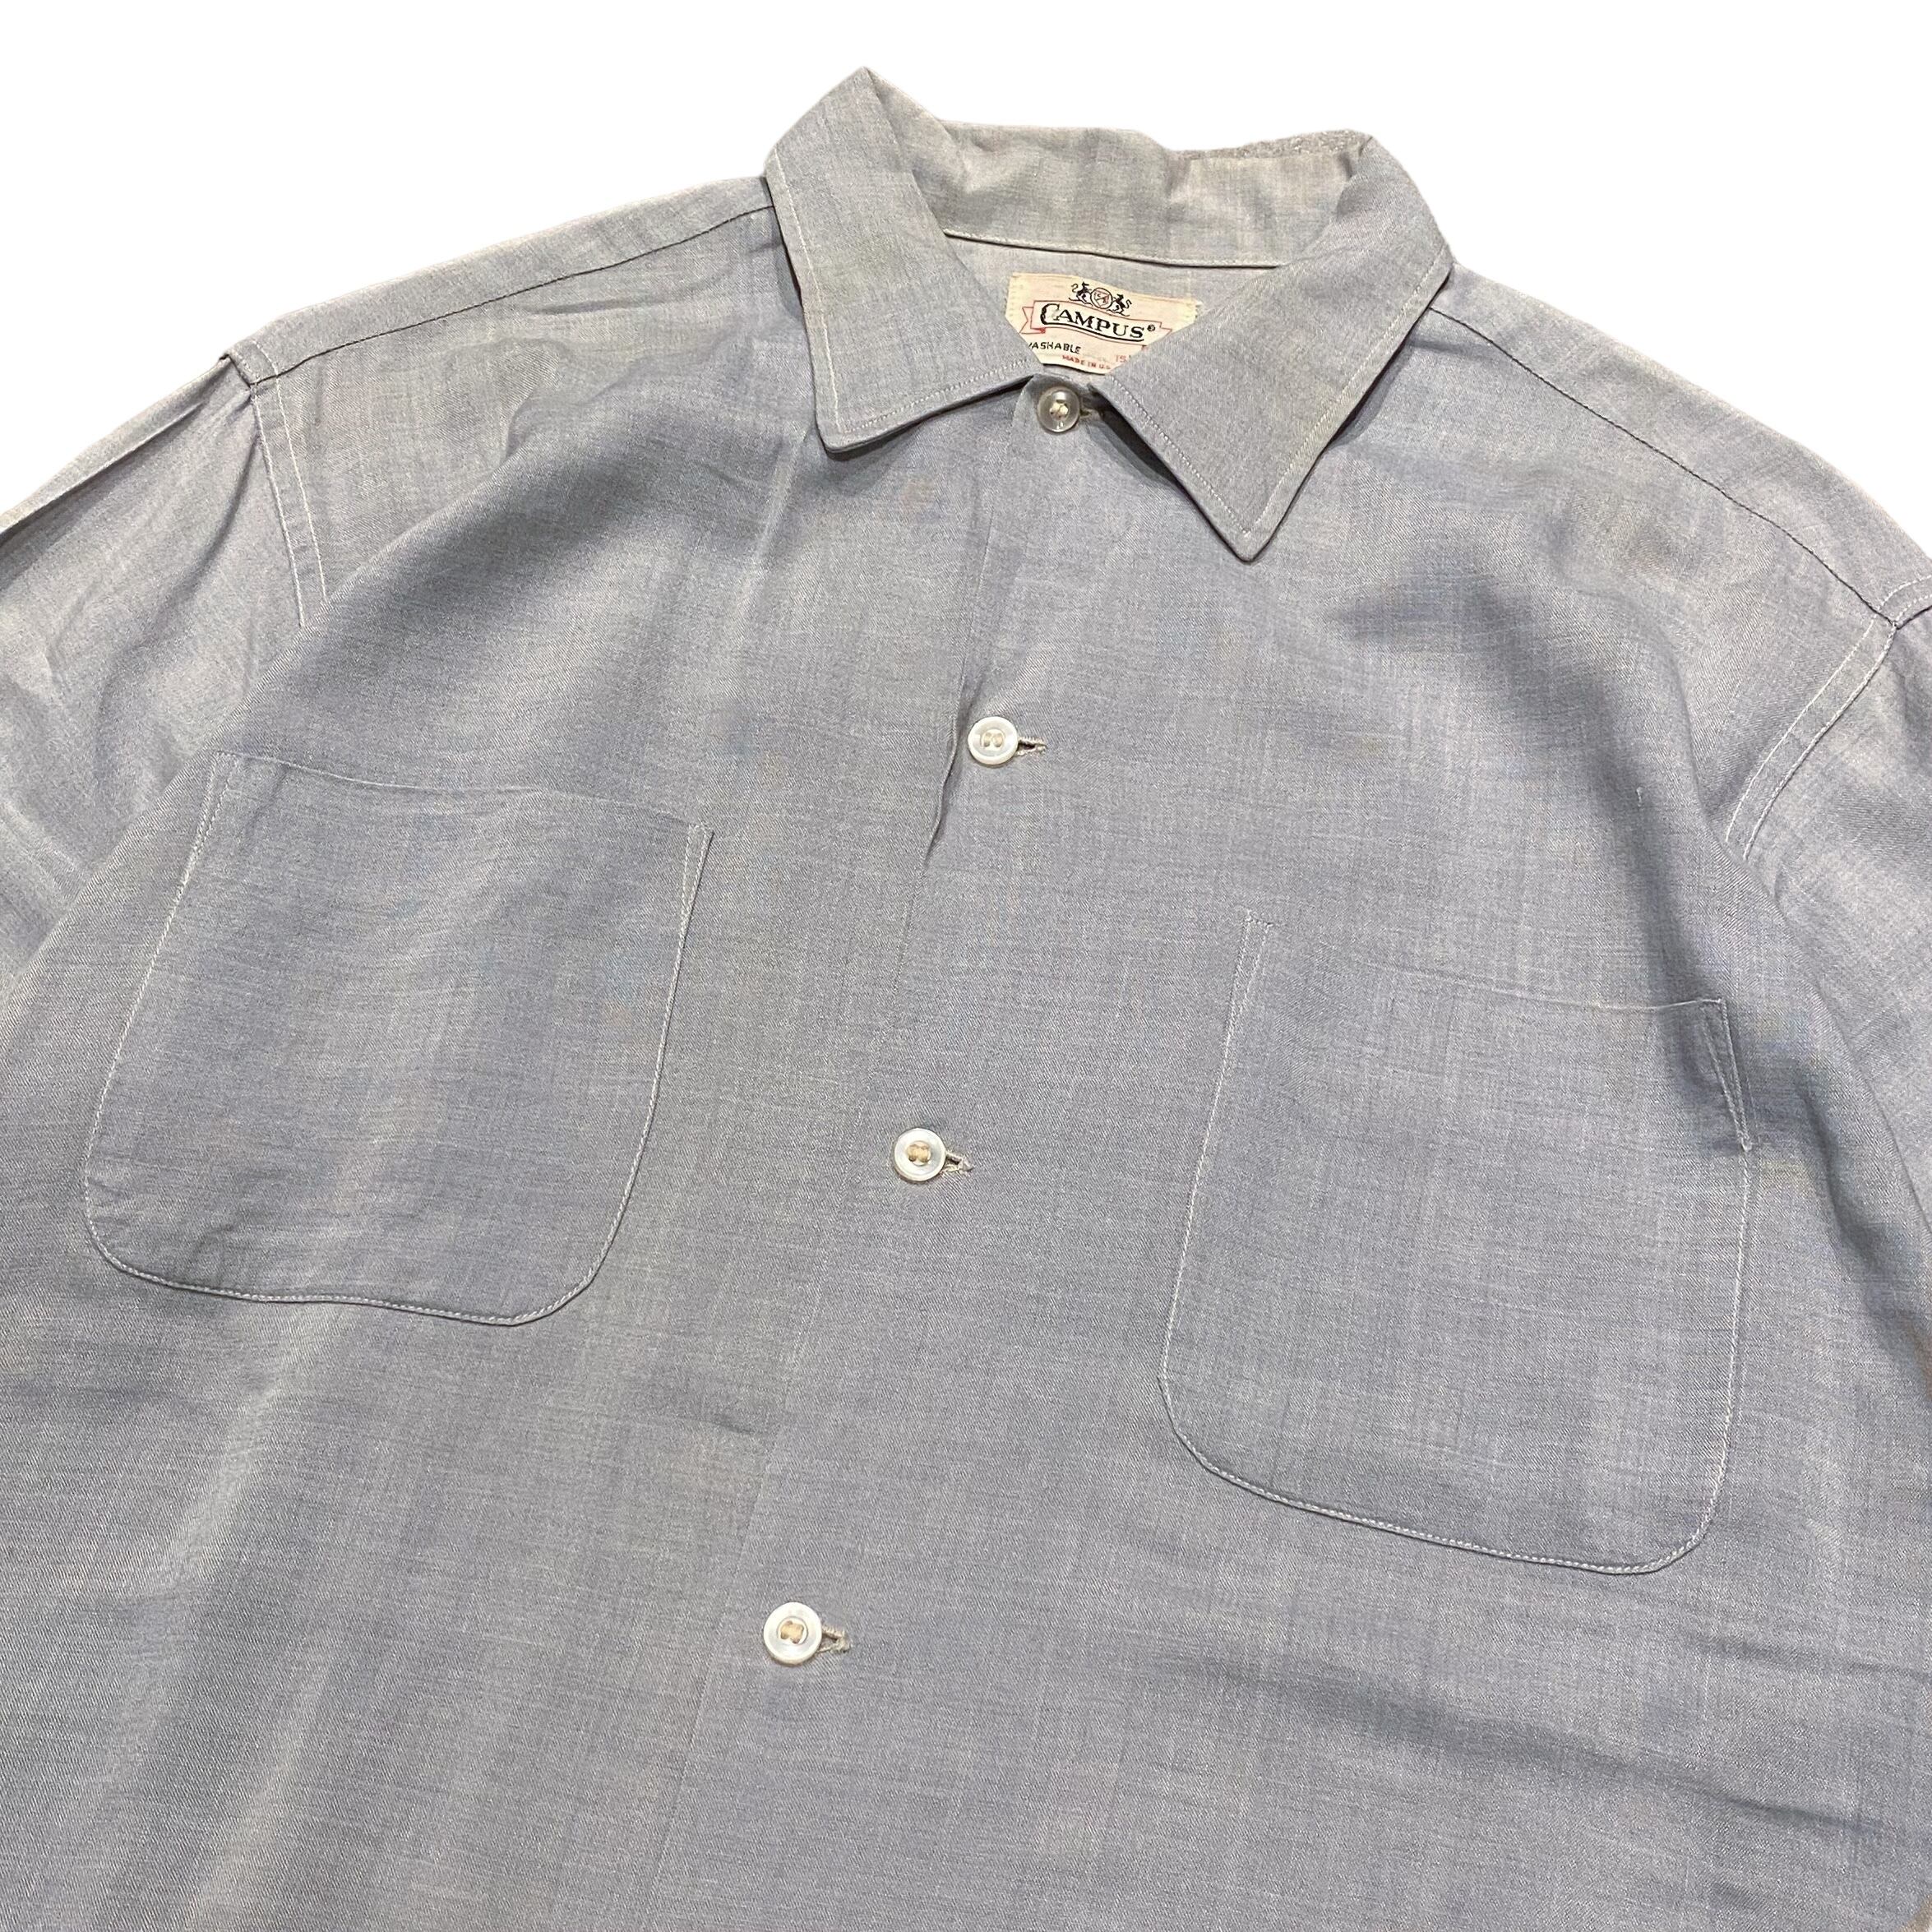 60's CAMPUS Rayon L/S Shirt M / シャツ レーヨン 開襟 古着 ヴィンテージ